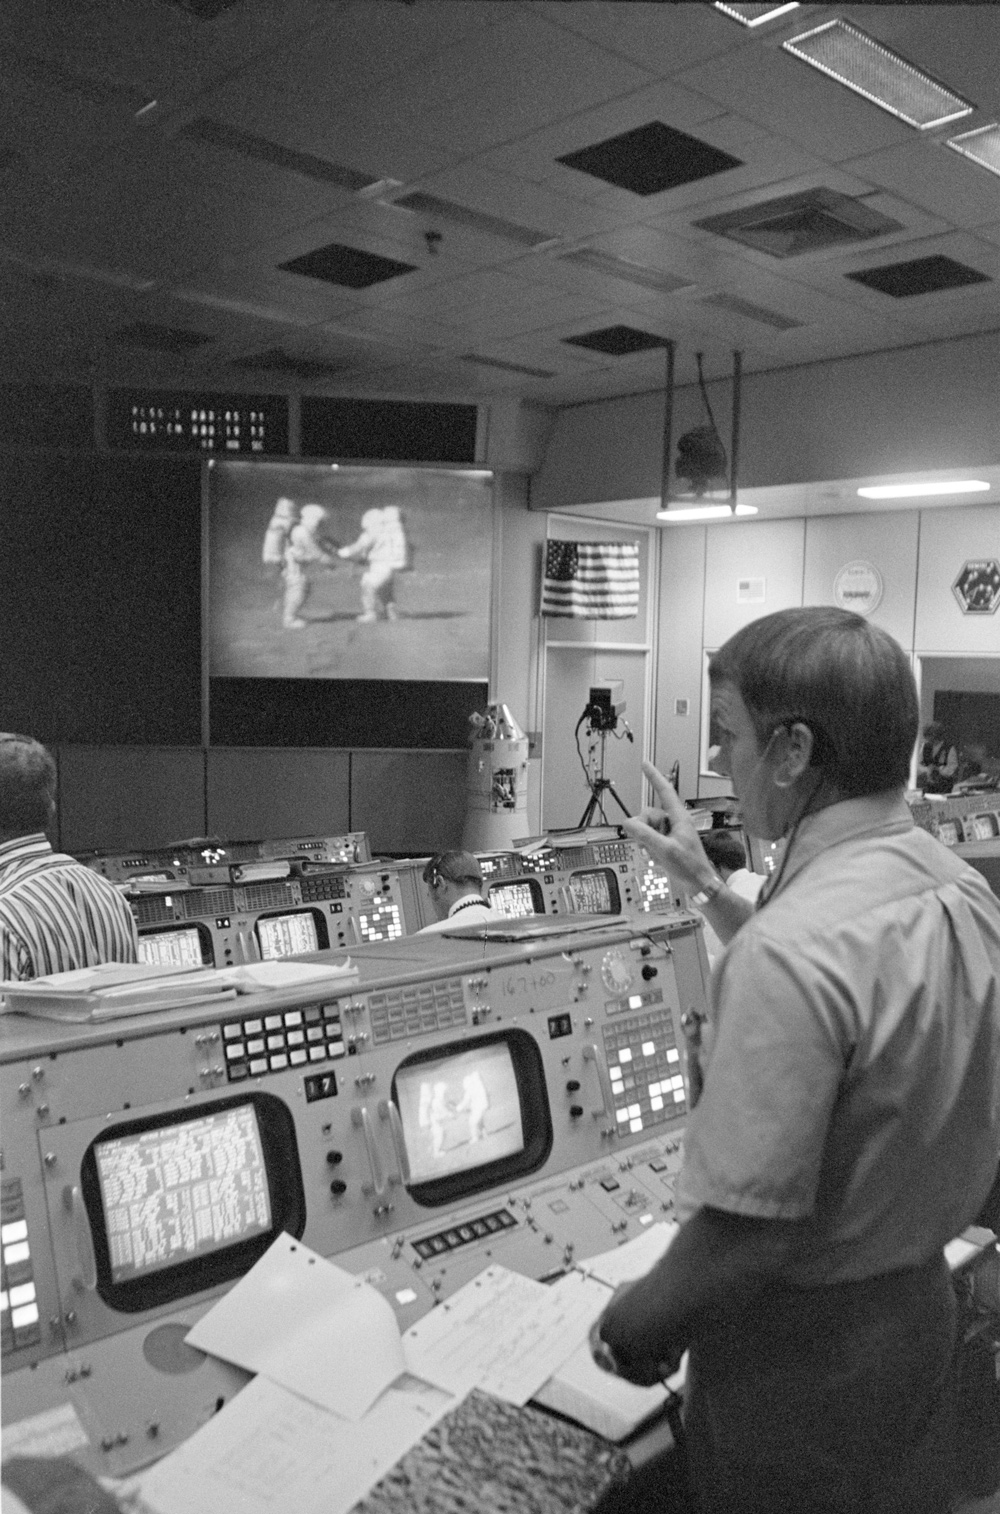 Apollo 15 flight director in Mission Control Center, surrounded by old-fashioned computer screens and interfaces. He raises a hand to point towards an image of astronauts on the Moon projected on the wall.